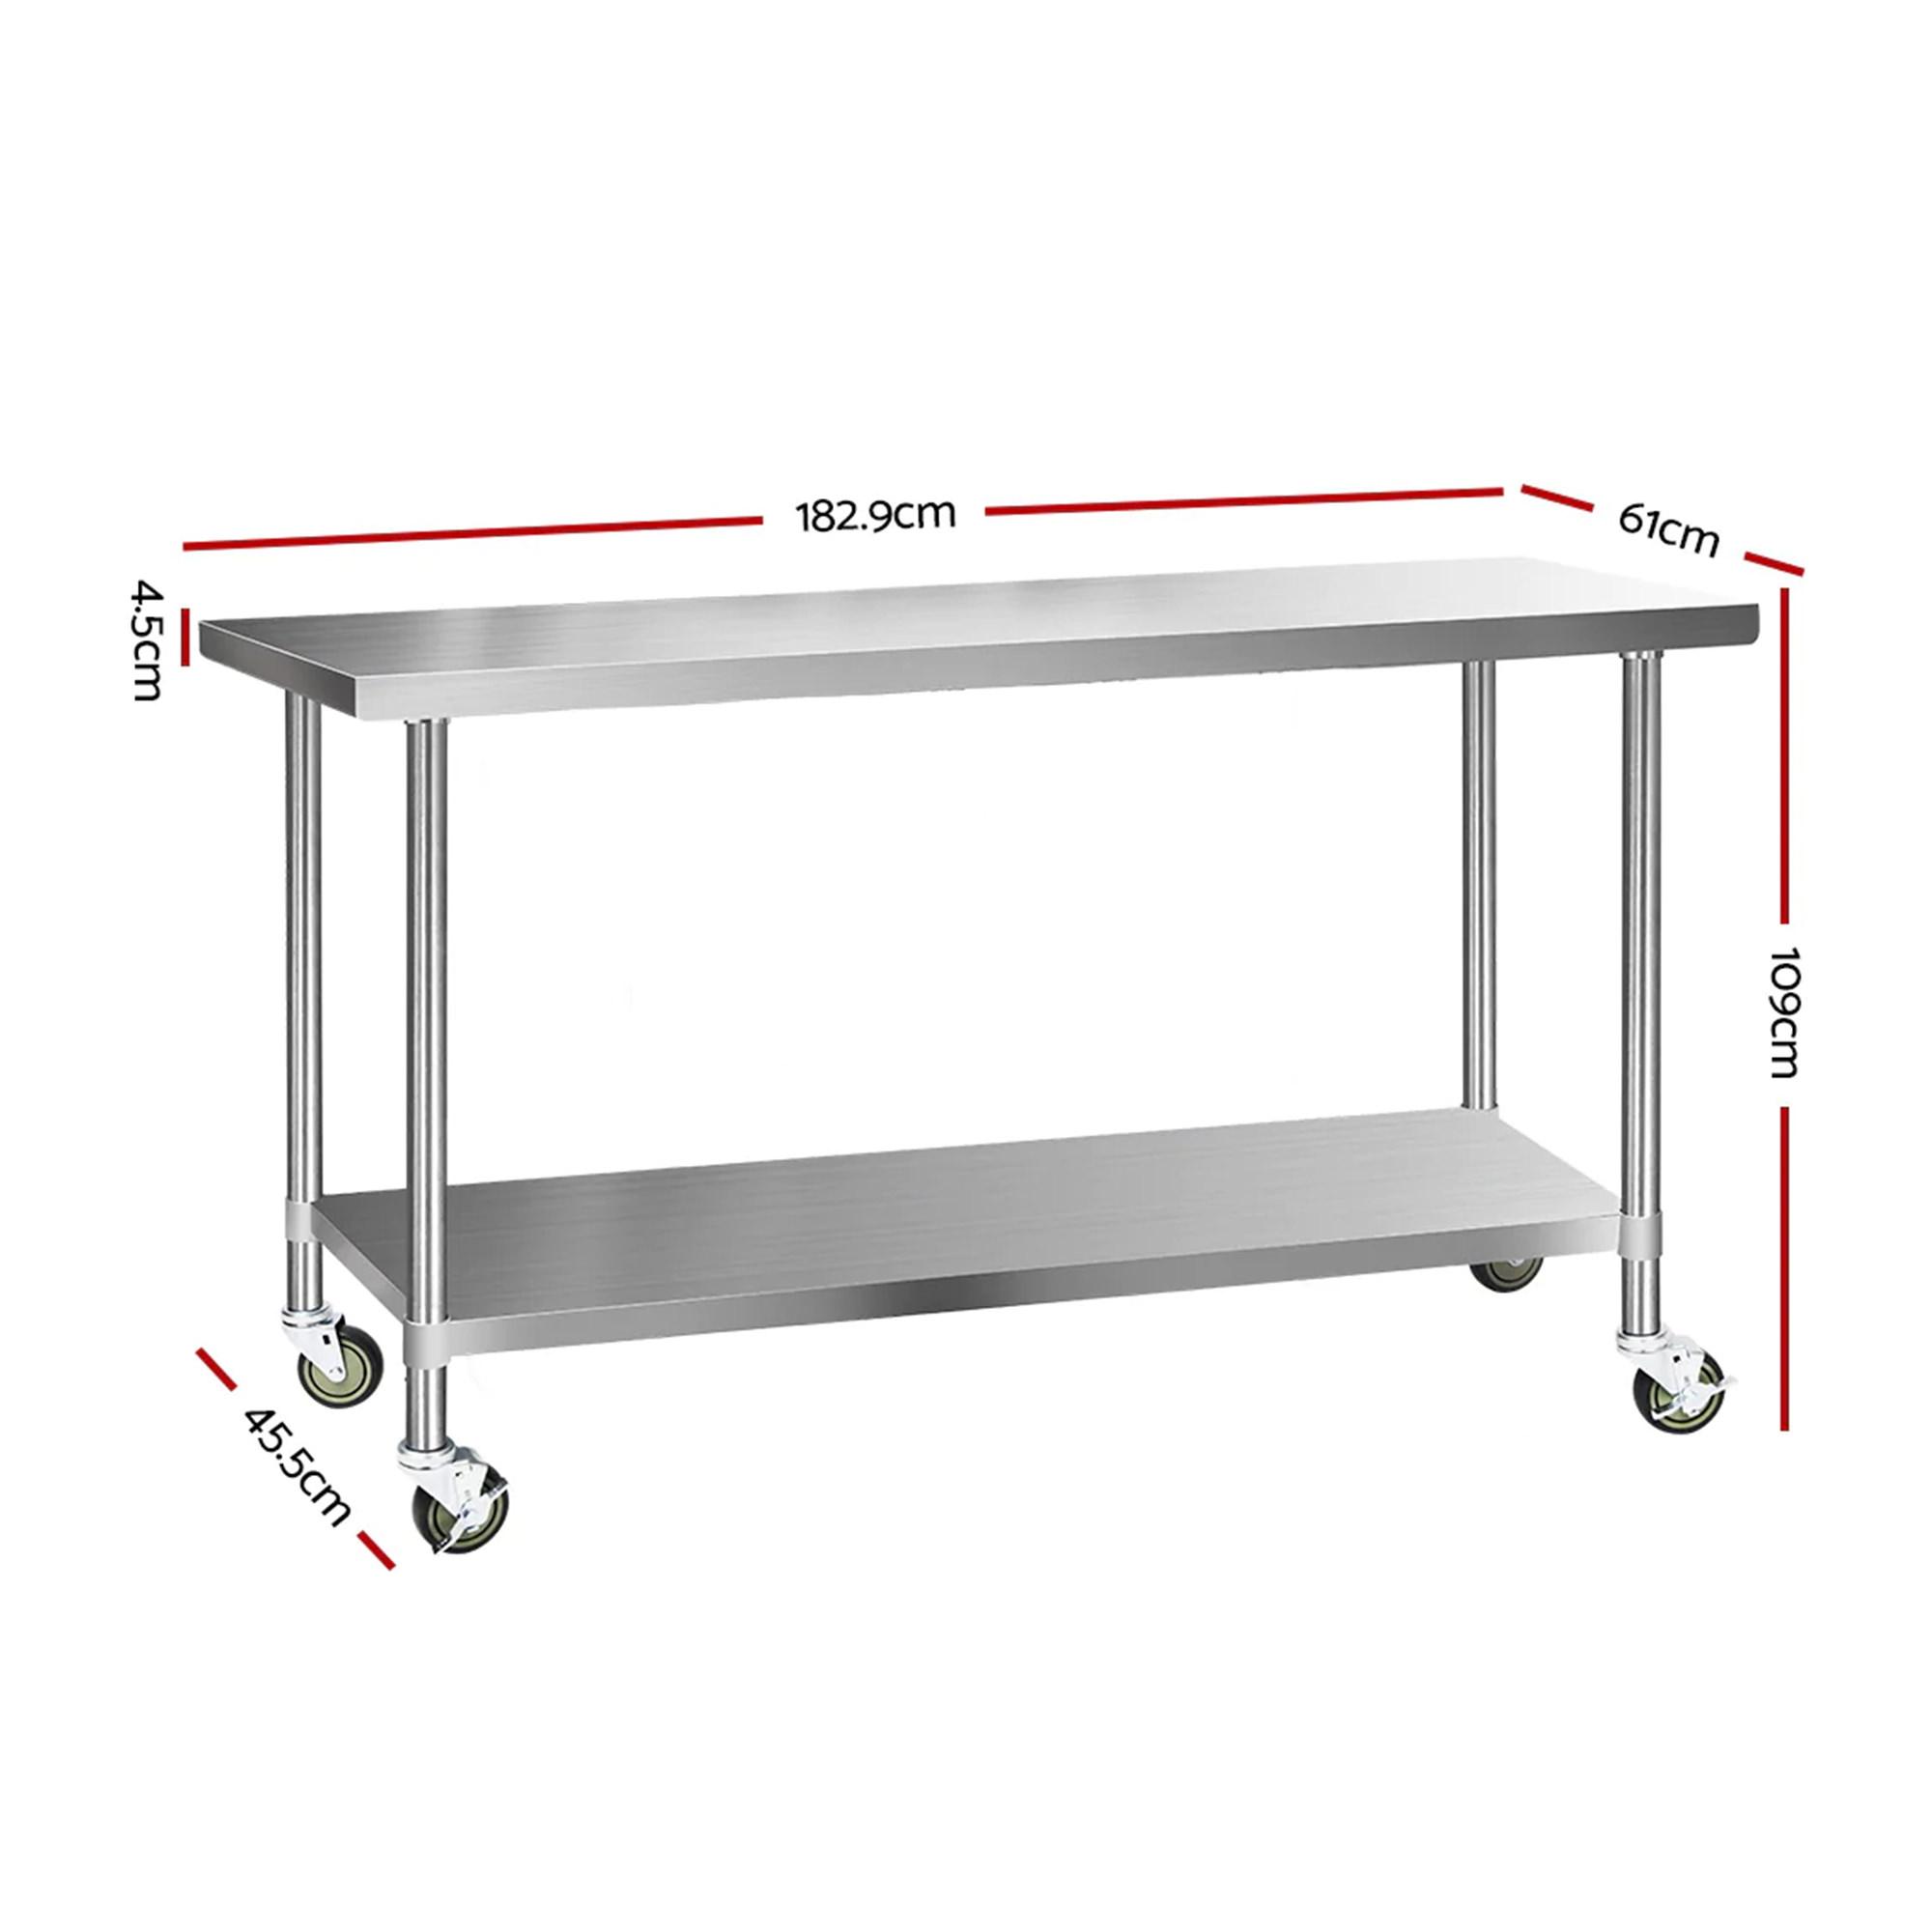 Cefito 430 Stainless Steel Kitchen Bench with Wheels 182.9x61cm Image 3